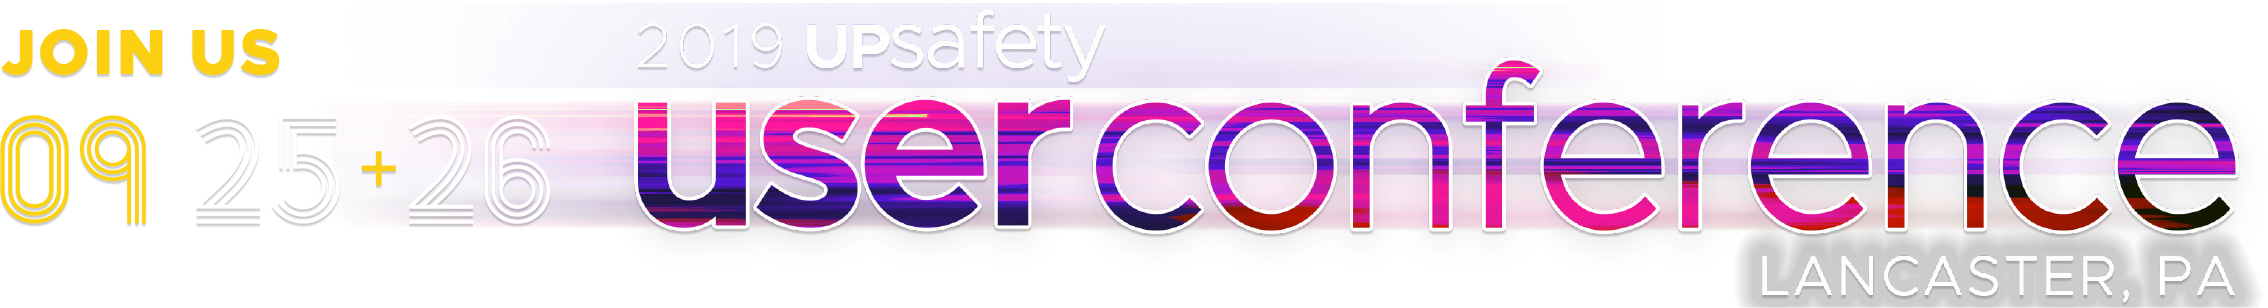 Join us September 25 and 26 for the 2019 UPsafety User Conference in Lancaster